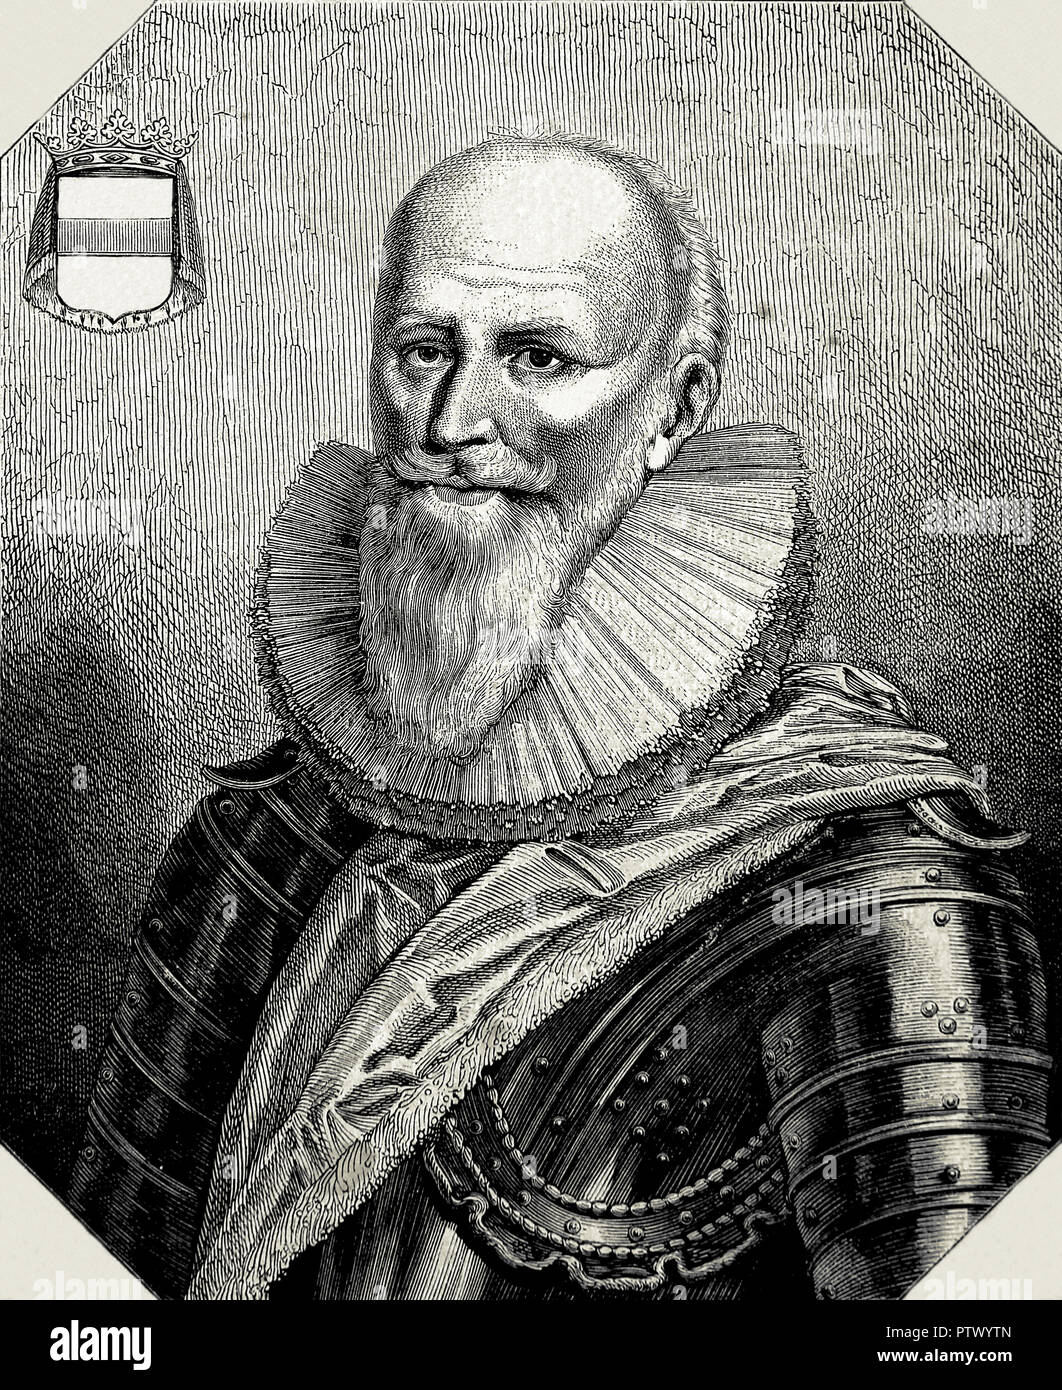 Duke of Sully (1560-1641) chief minister of France during the reign of Henry IV. Portrait with armor. Line engraving. Stock Photo